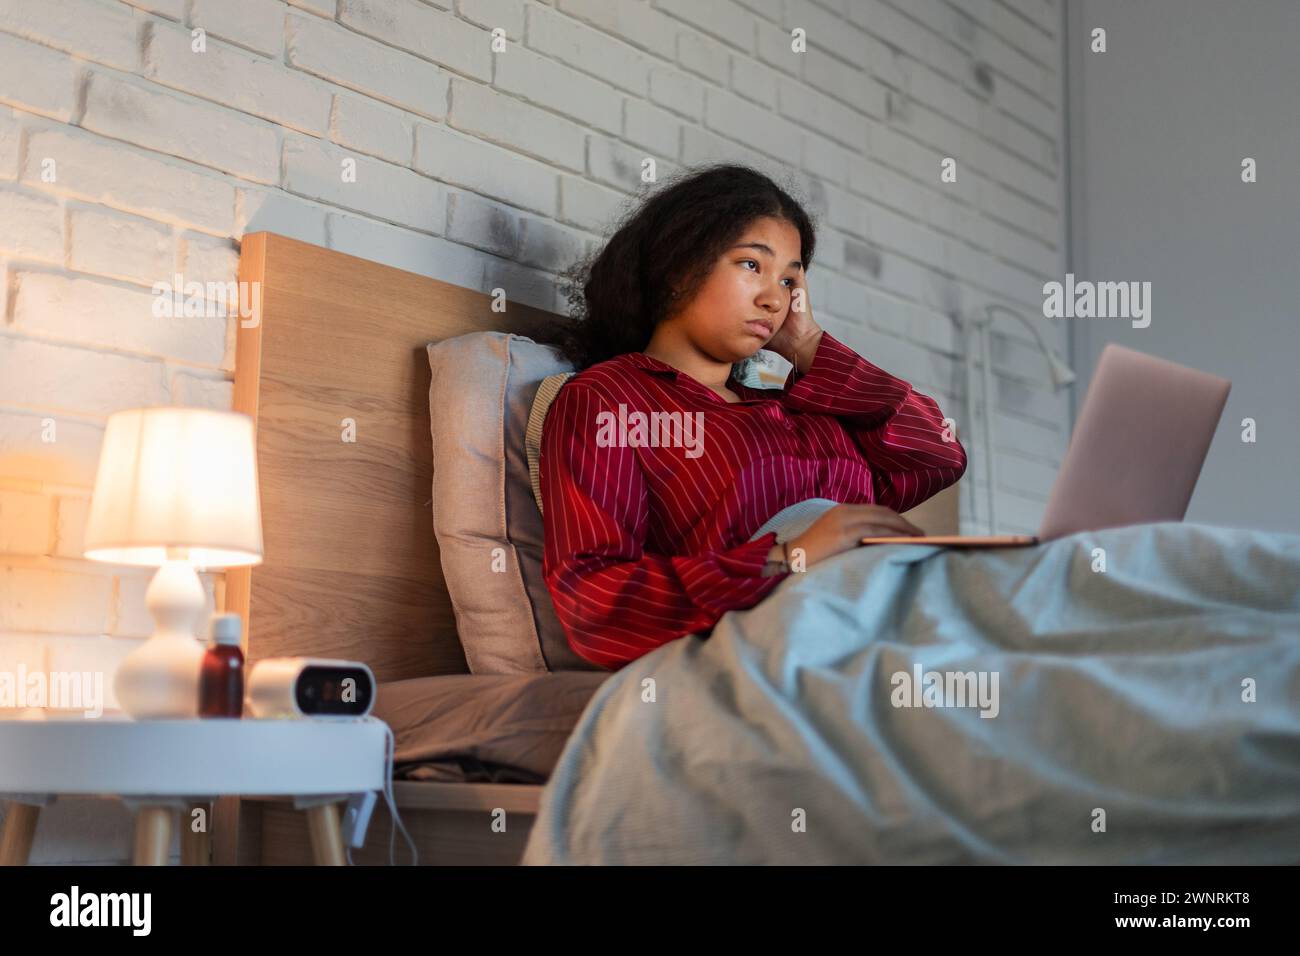 Woman can't fall asleep, insomnia a sleep problems. Concept of sleep routine and techniques for better sleep. World Sleep Day. Stock Photo